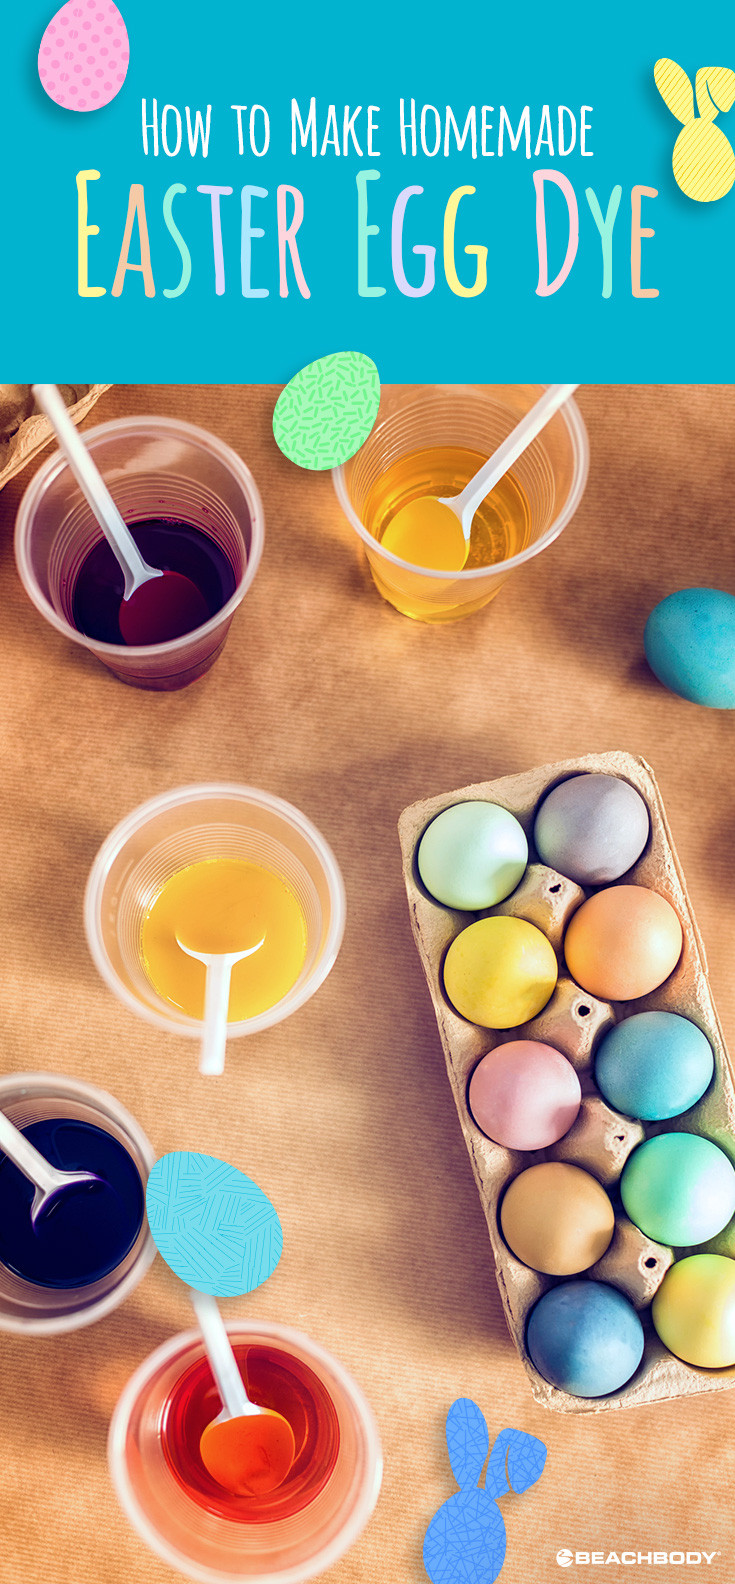 How To Make Easter Egg Dye With Food Coloring
 How to Make Homemade Easter Egg Dye